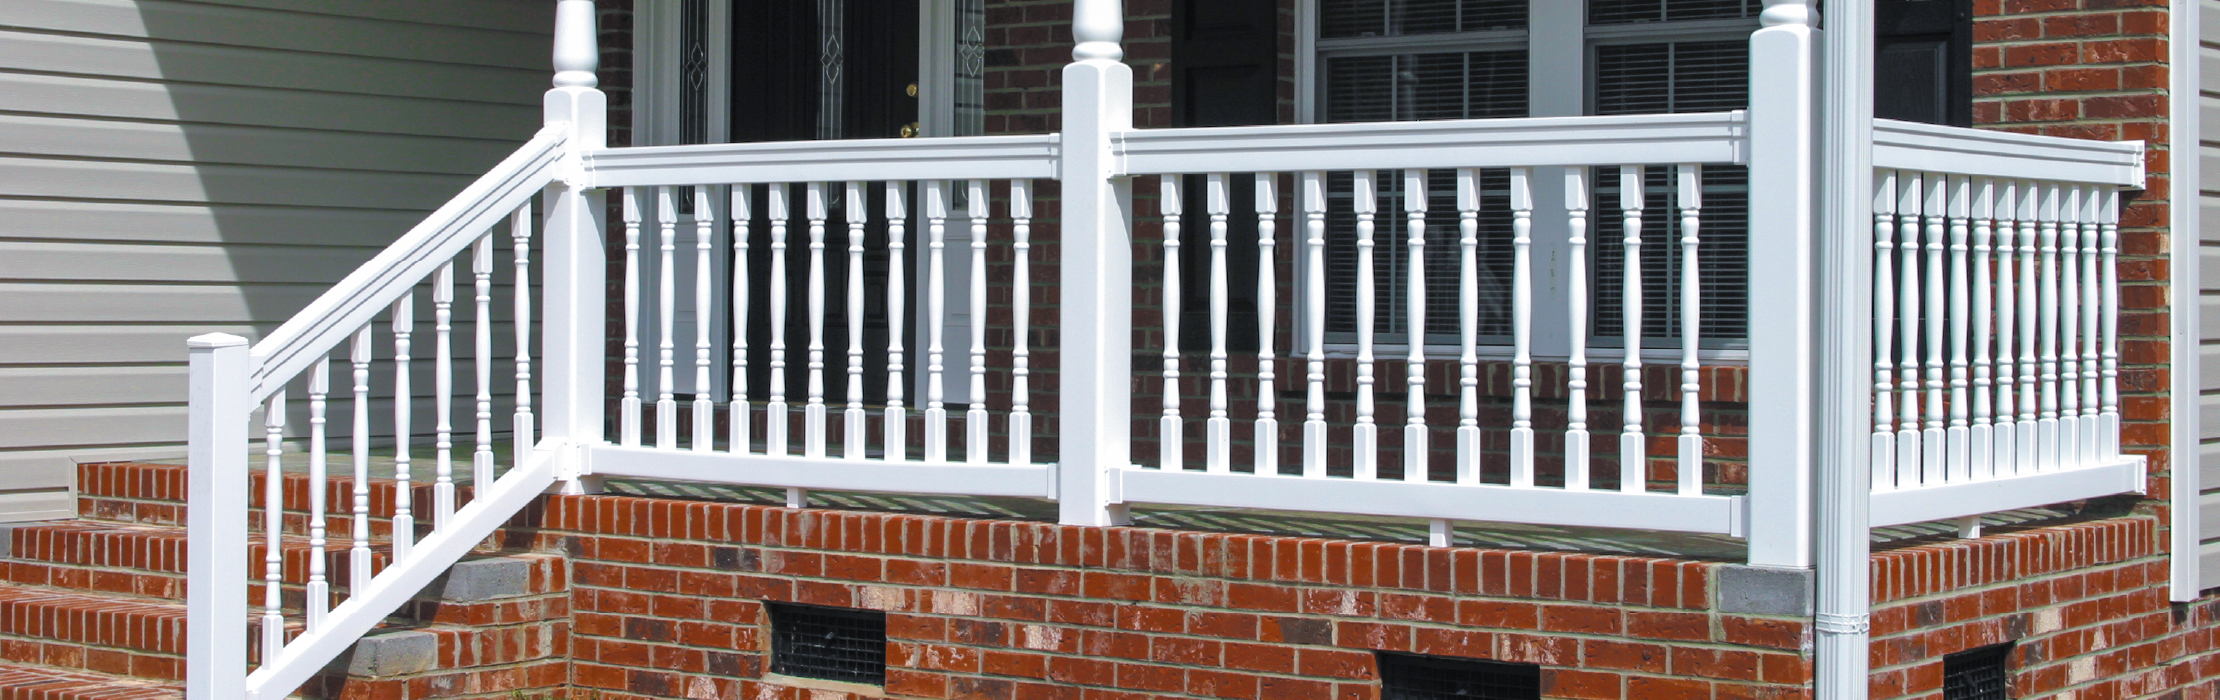 Solid Acrylic Rod - A-ROD - Architectural Railings - Tubing